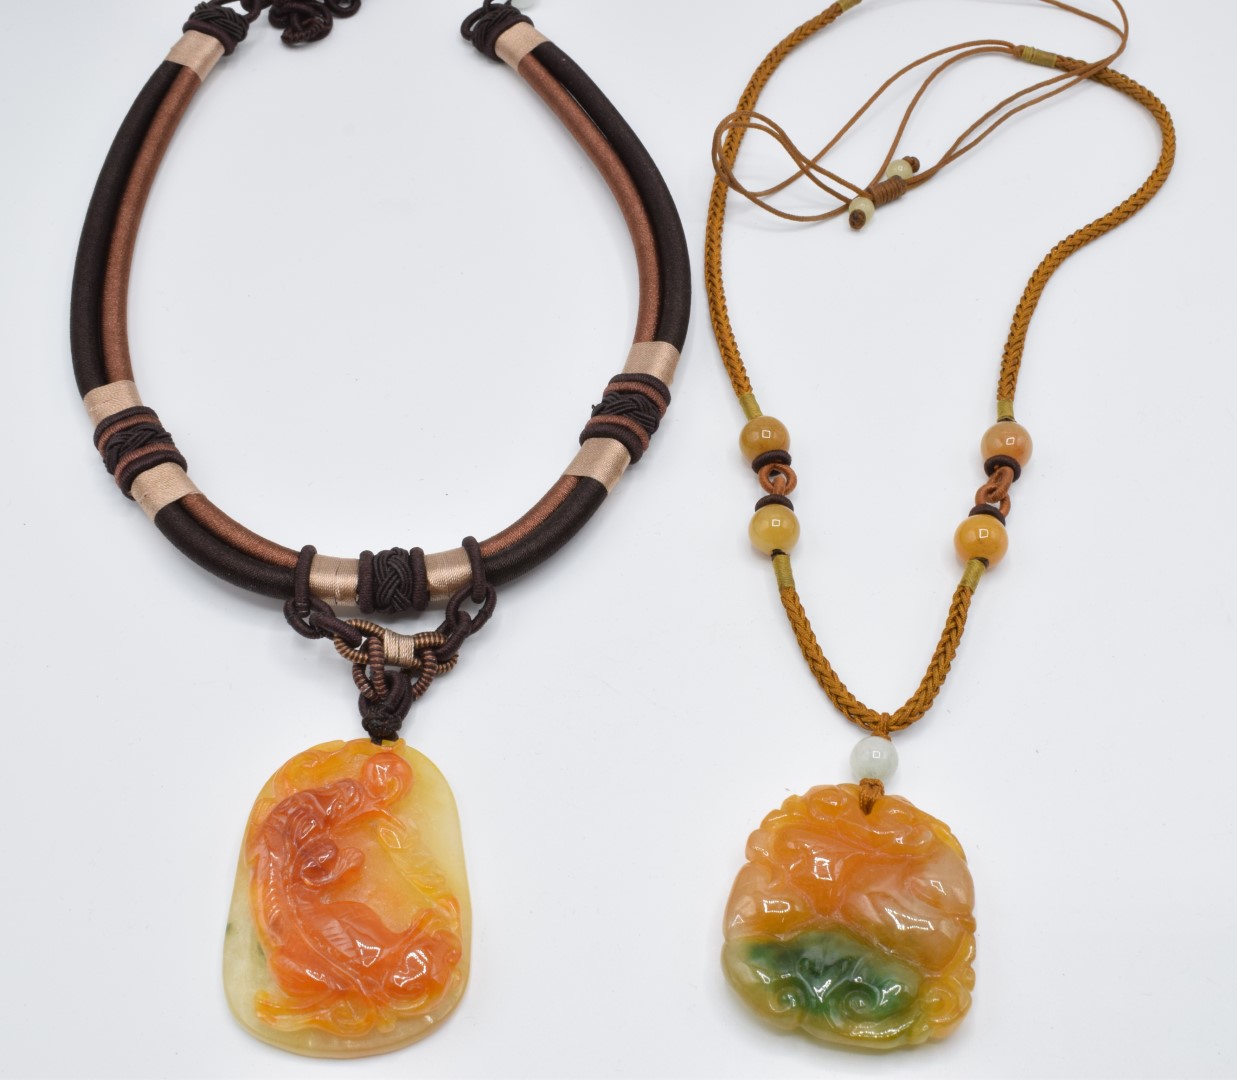 Two Chinese orange jade pendants, one depicting a creature (5.5 x 3.8cm) and the other peaches, 4. - Image 4 of 4